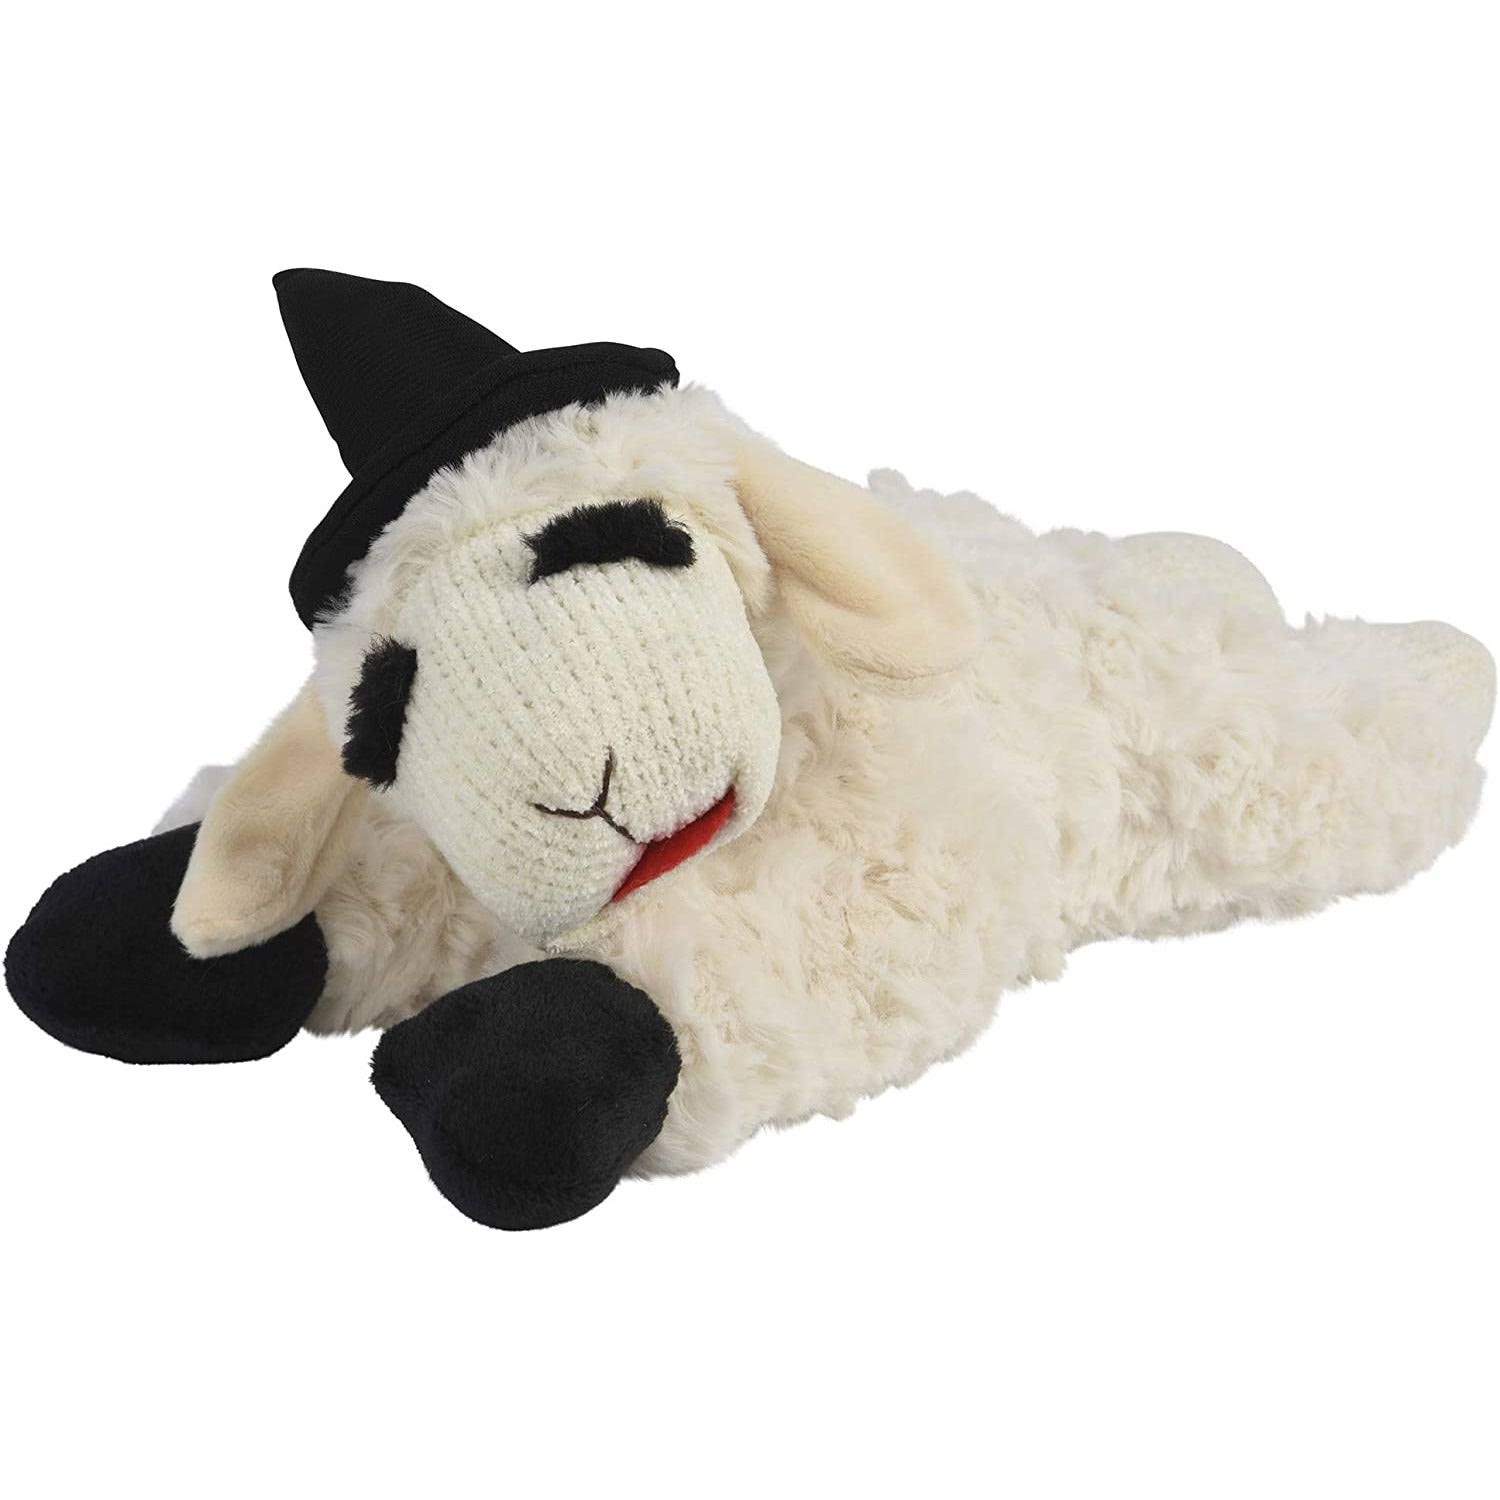 Multipets Halloween Lamb Chop Dog Toy - Black Witches Hat - One Size